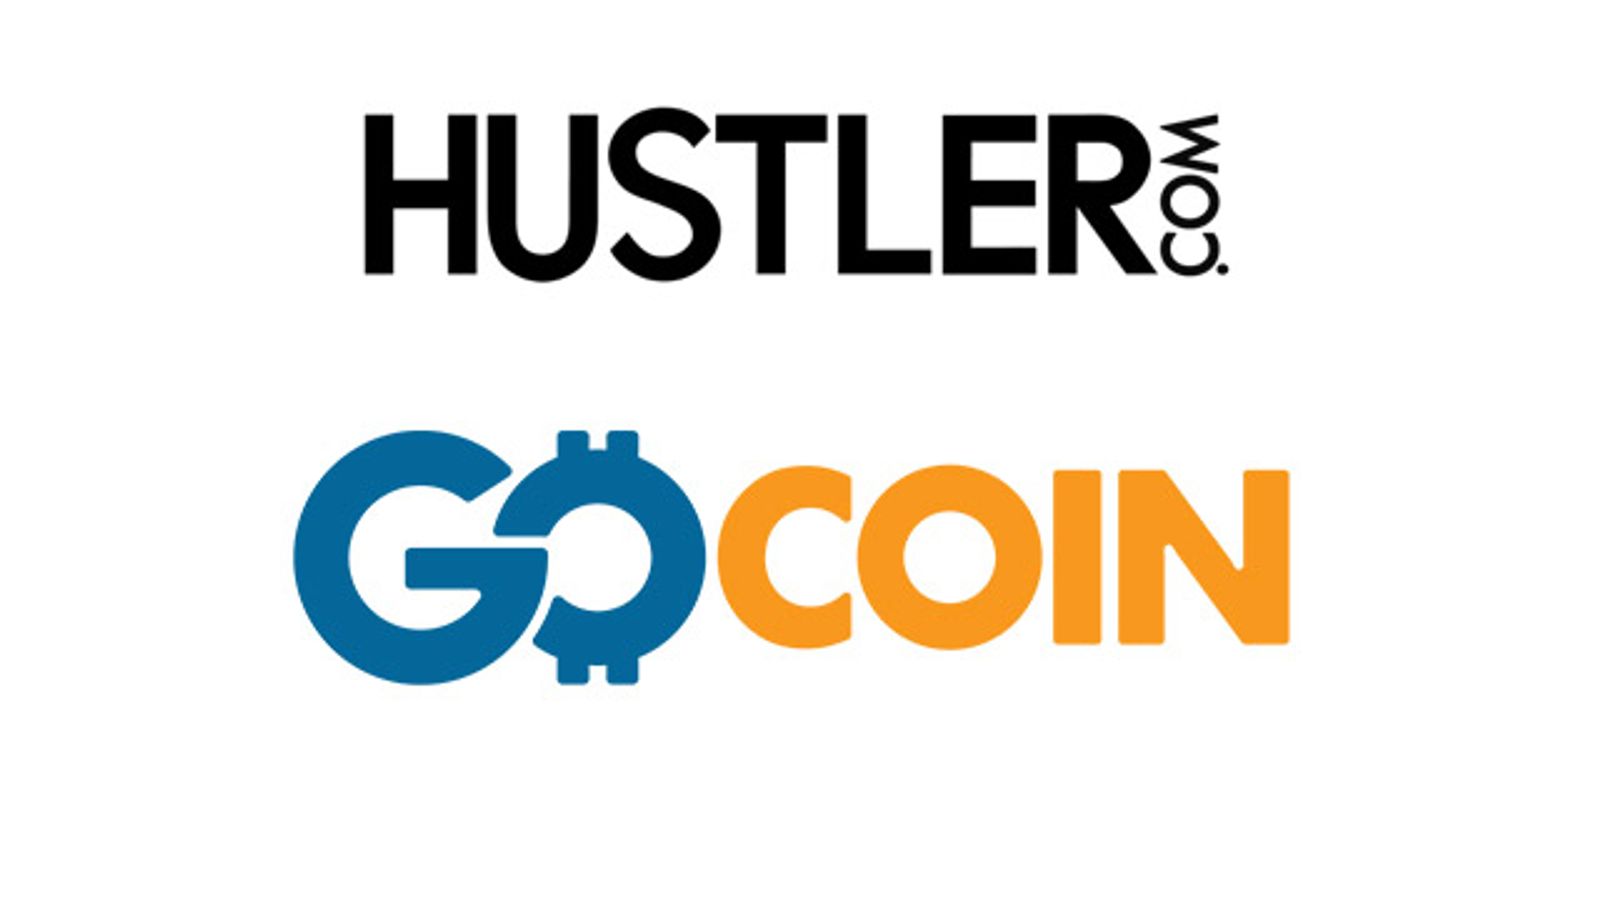 Hustler.com Launches Lifetime Memberships with Bitcoin